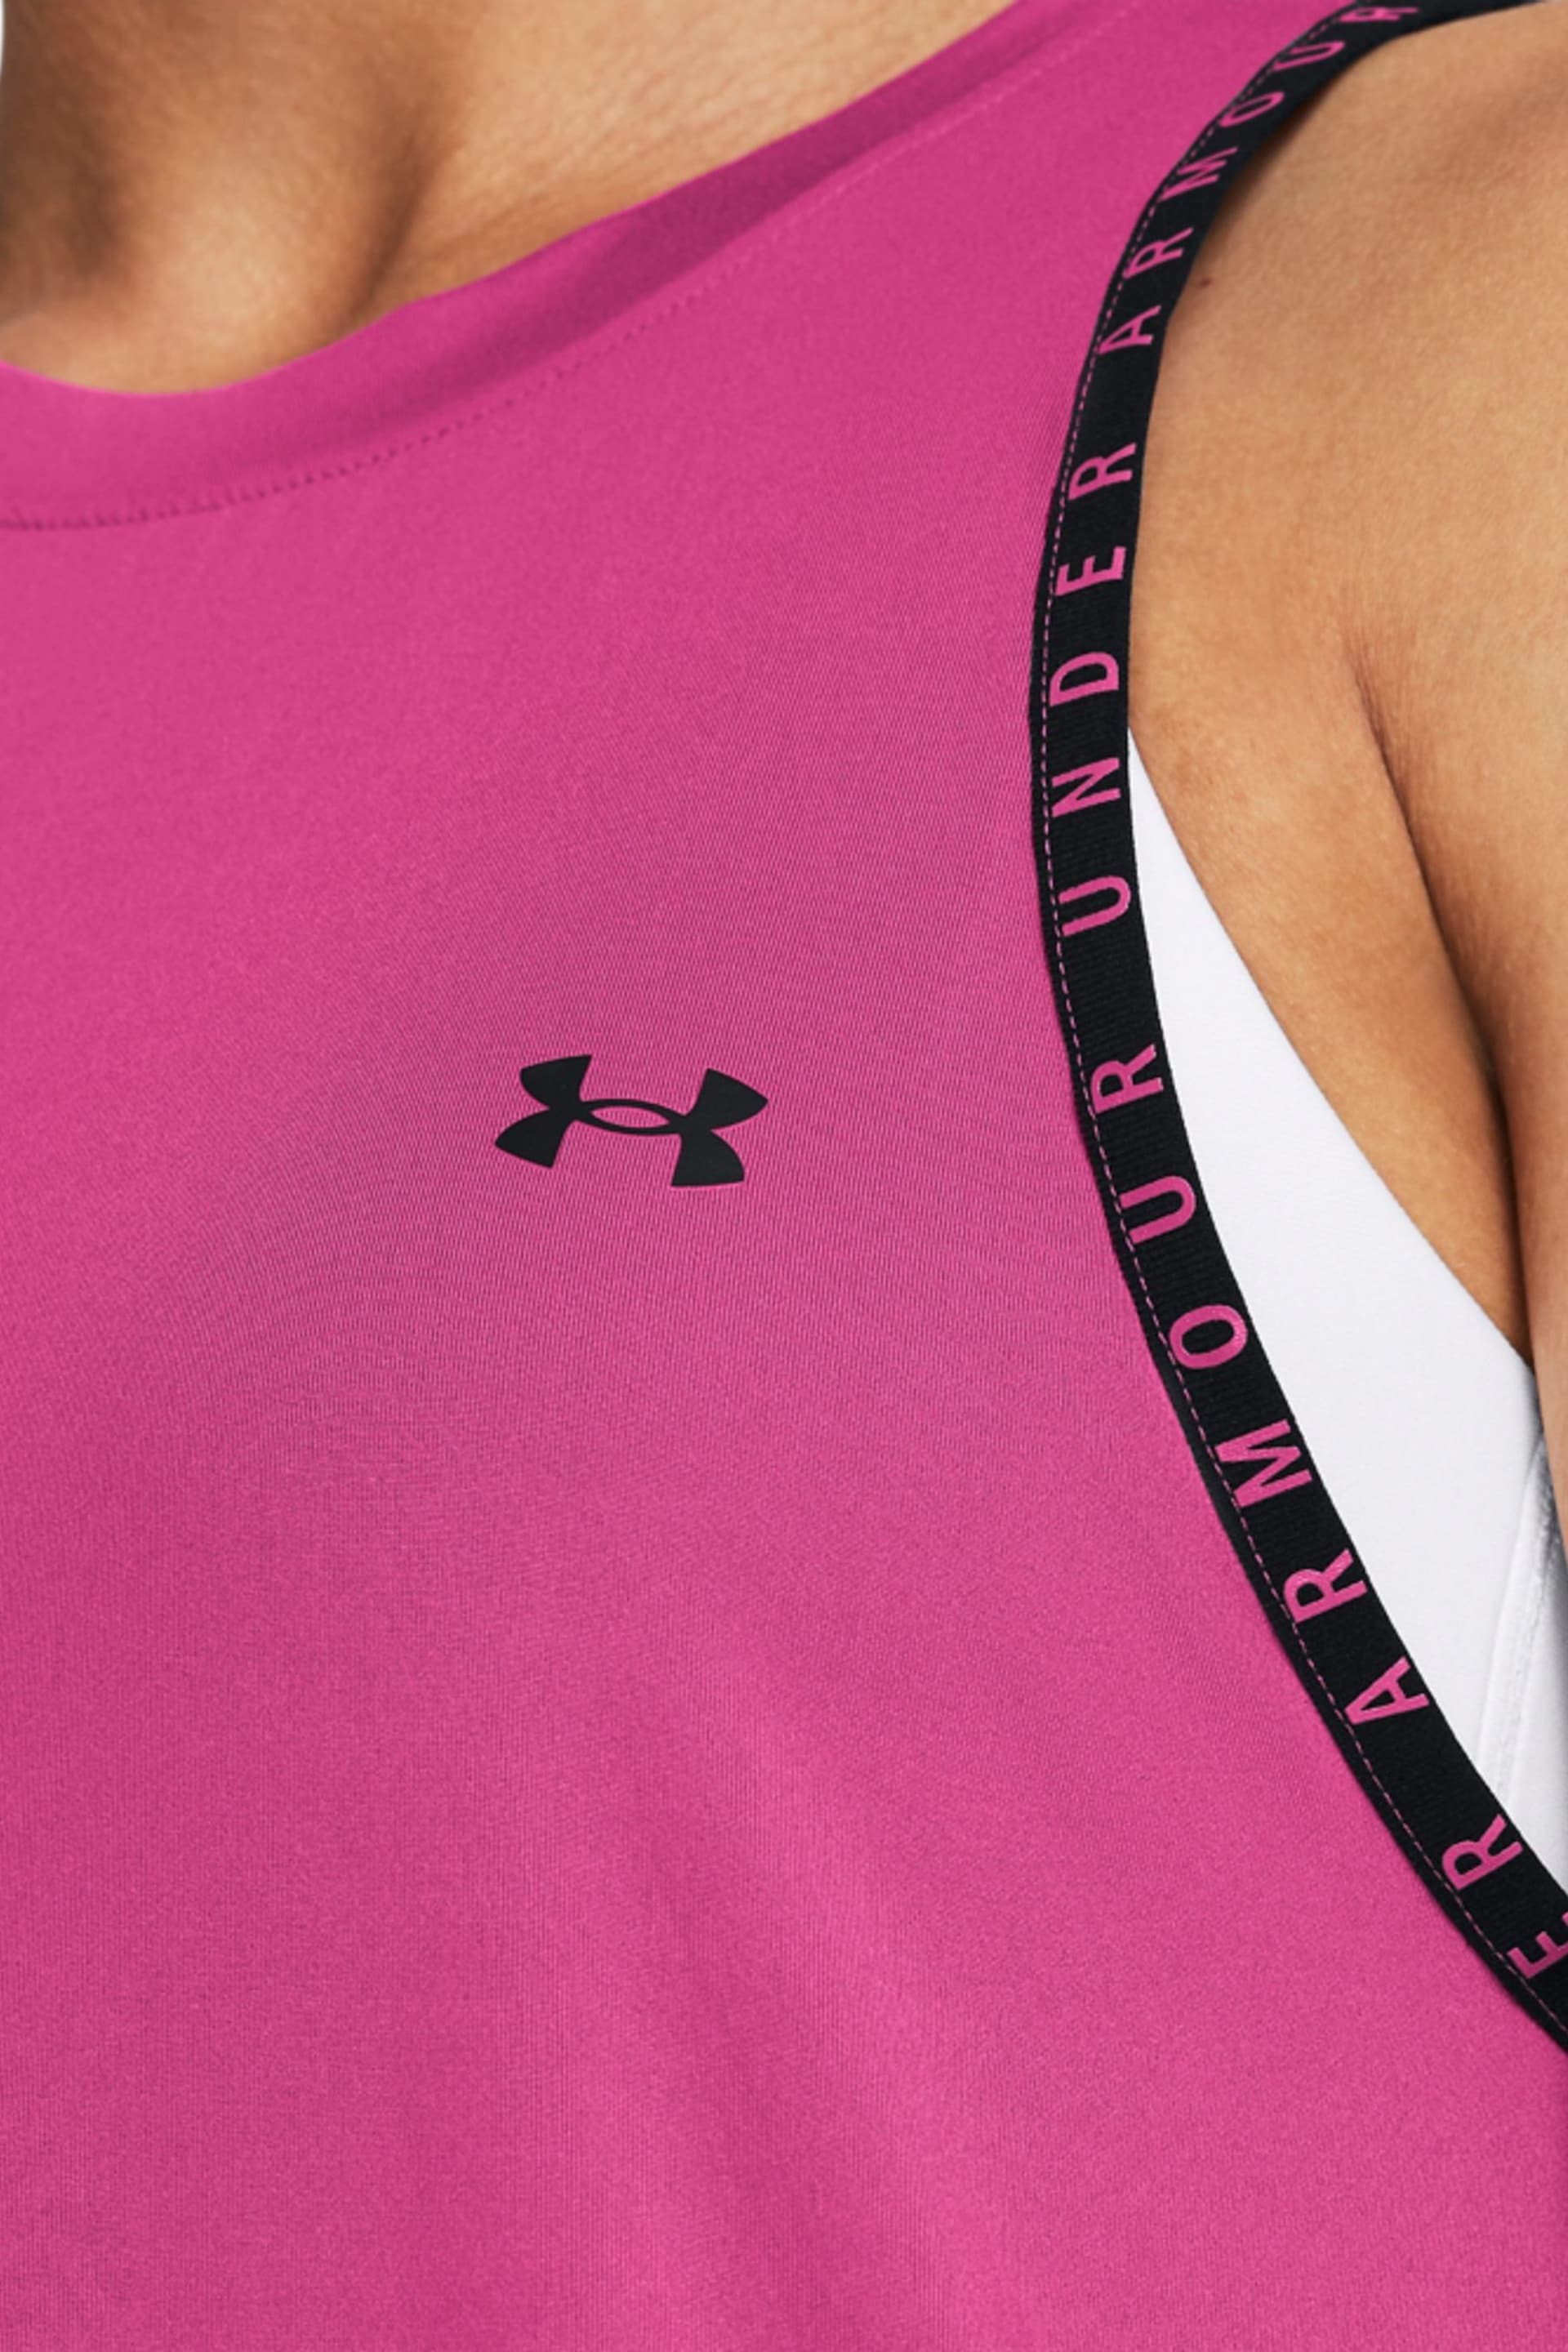 Under Armour Pink Knockout Novelty Tank - Image 3 of 5